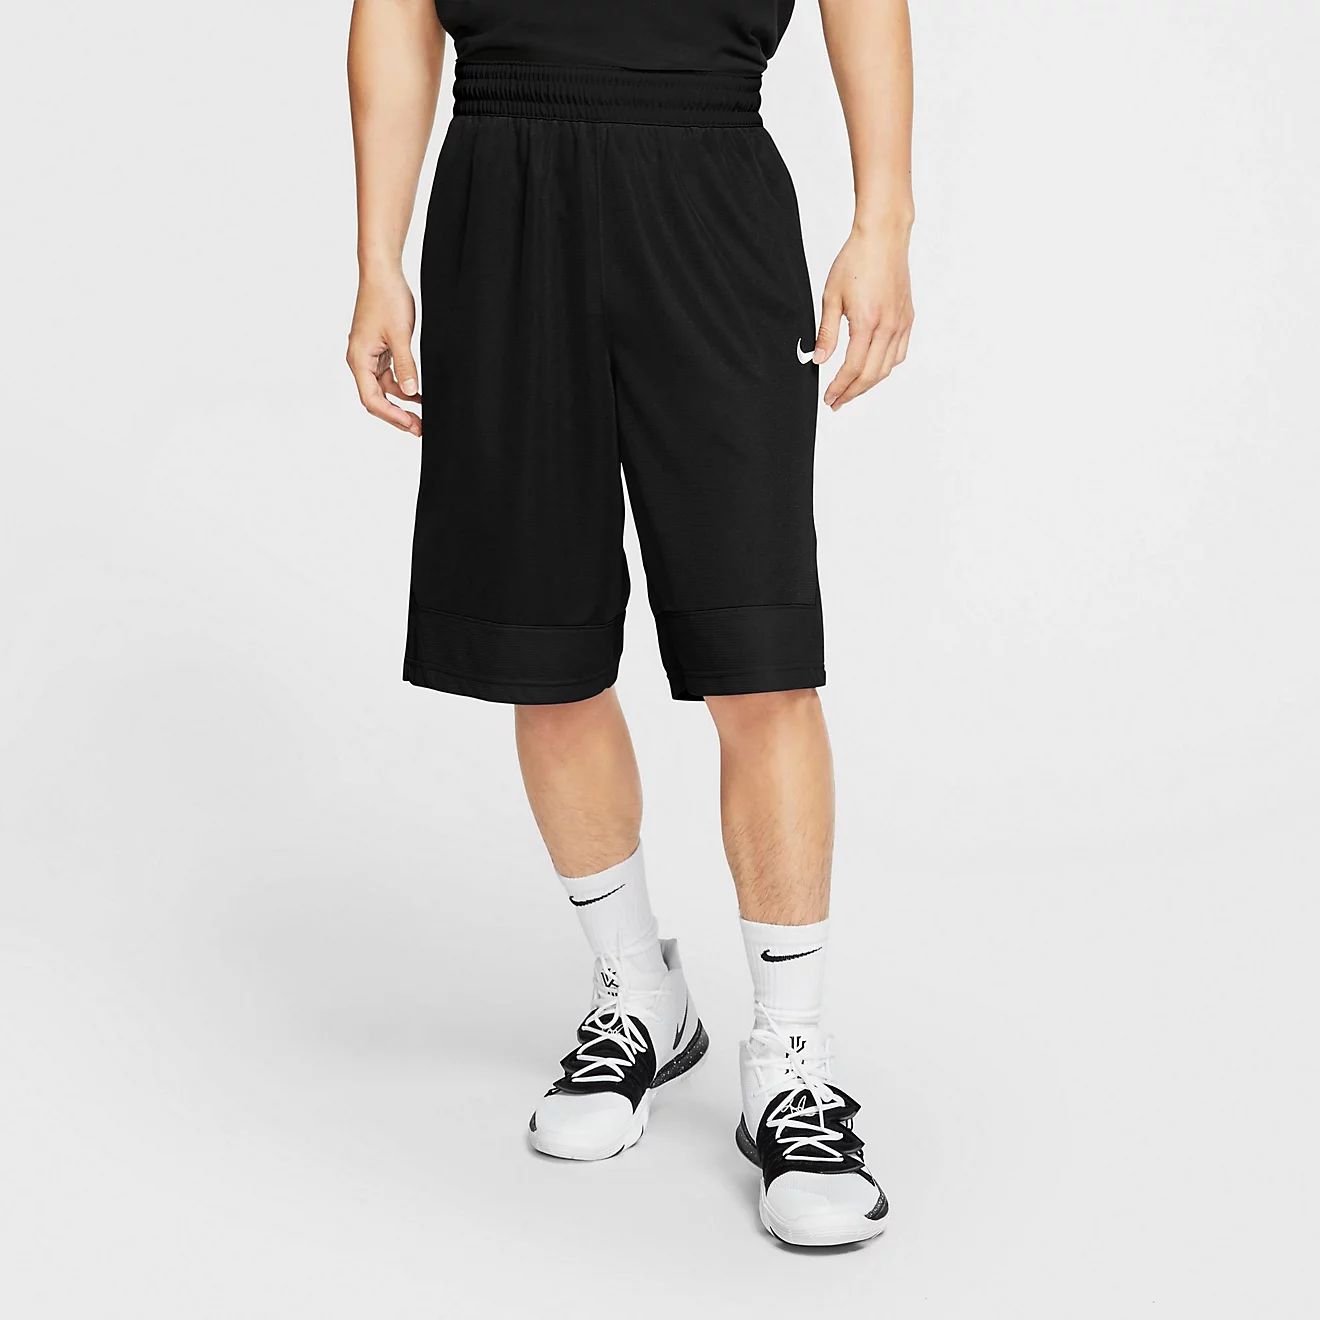 Nike Men's Dry Icon Basketball Shorts | Academy Sports + Outdoors